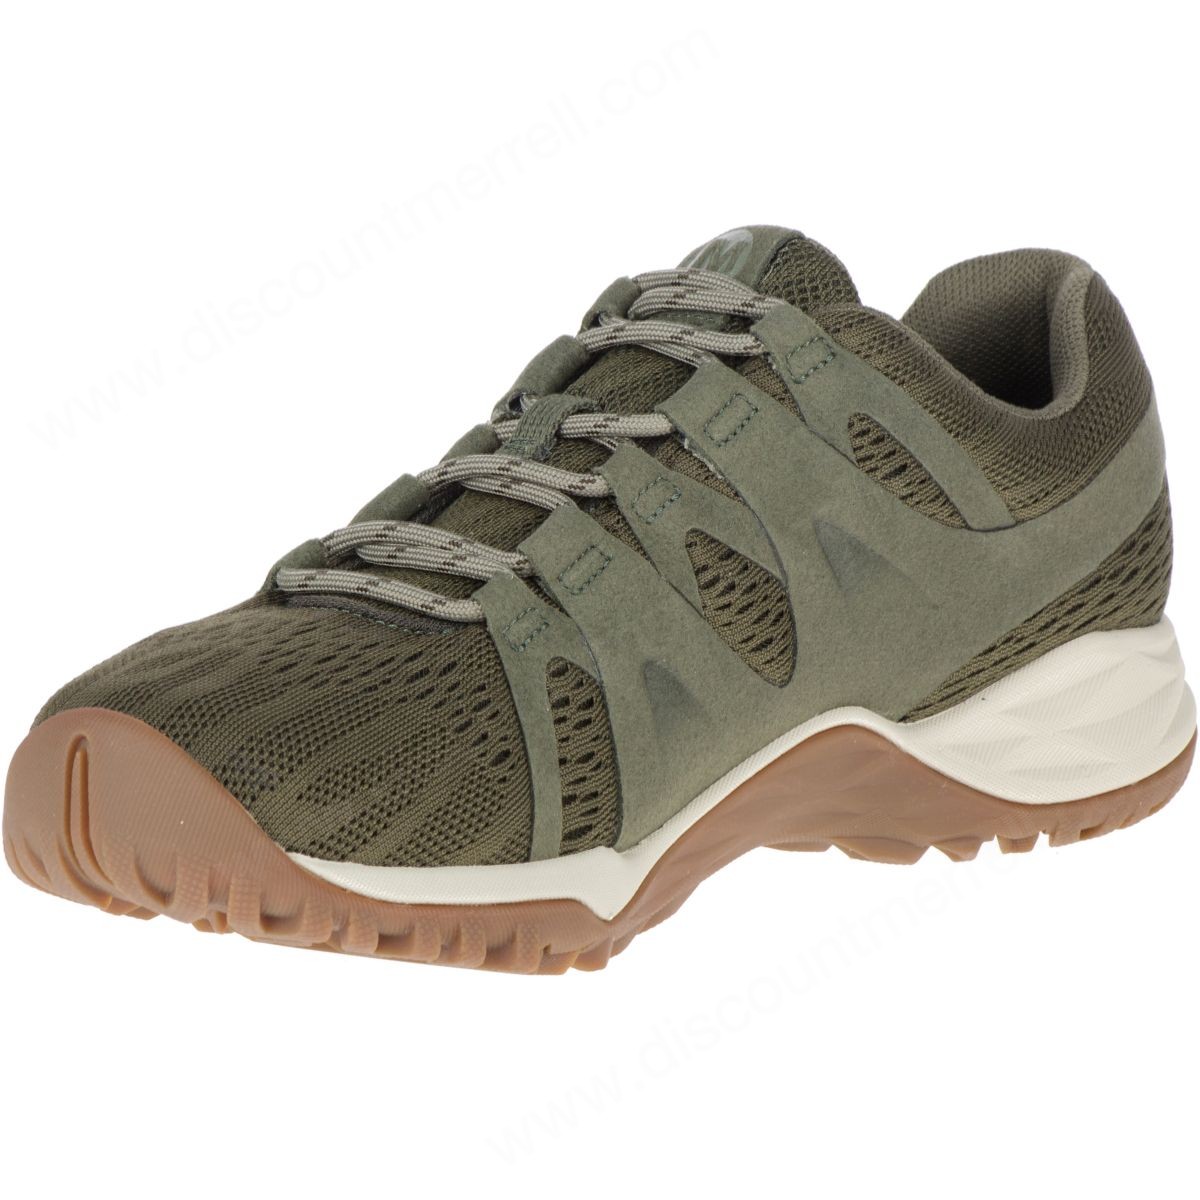 Merrell Lady's Siren Guided Lace Q2 Dusty Olive - -5